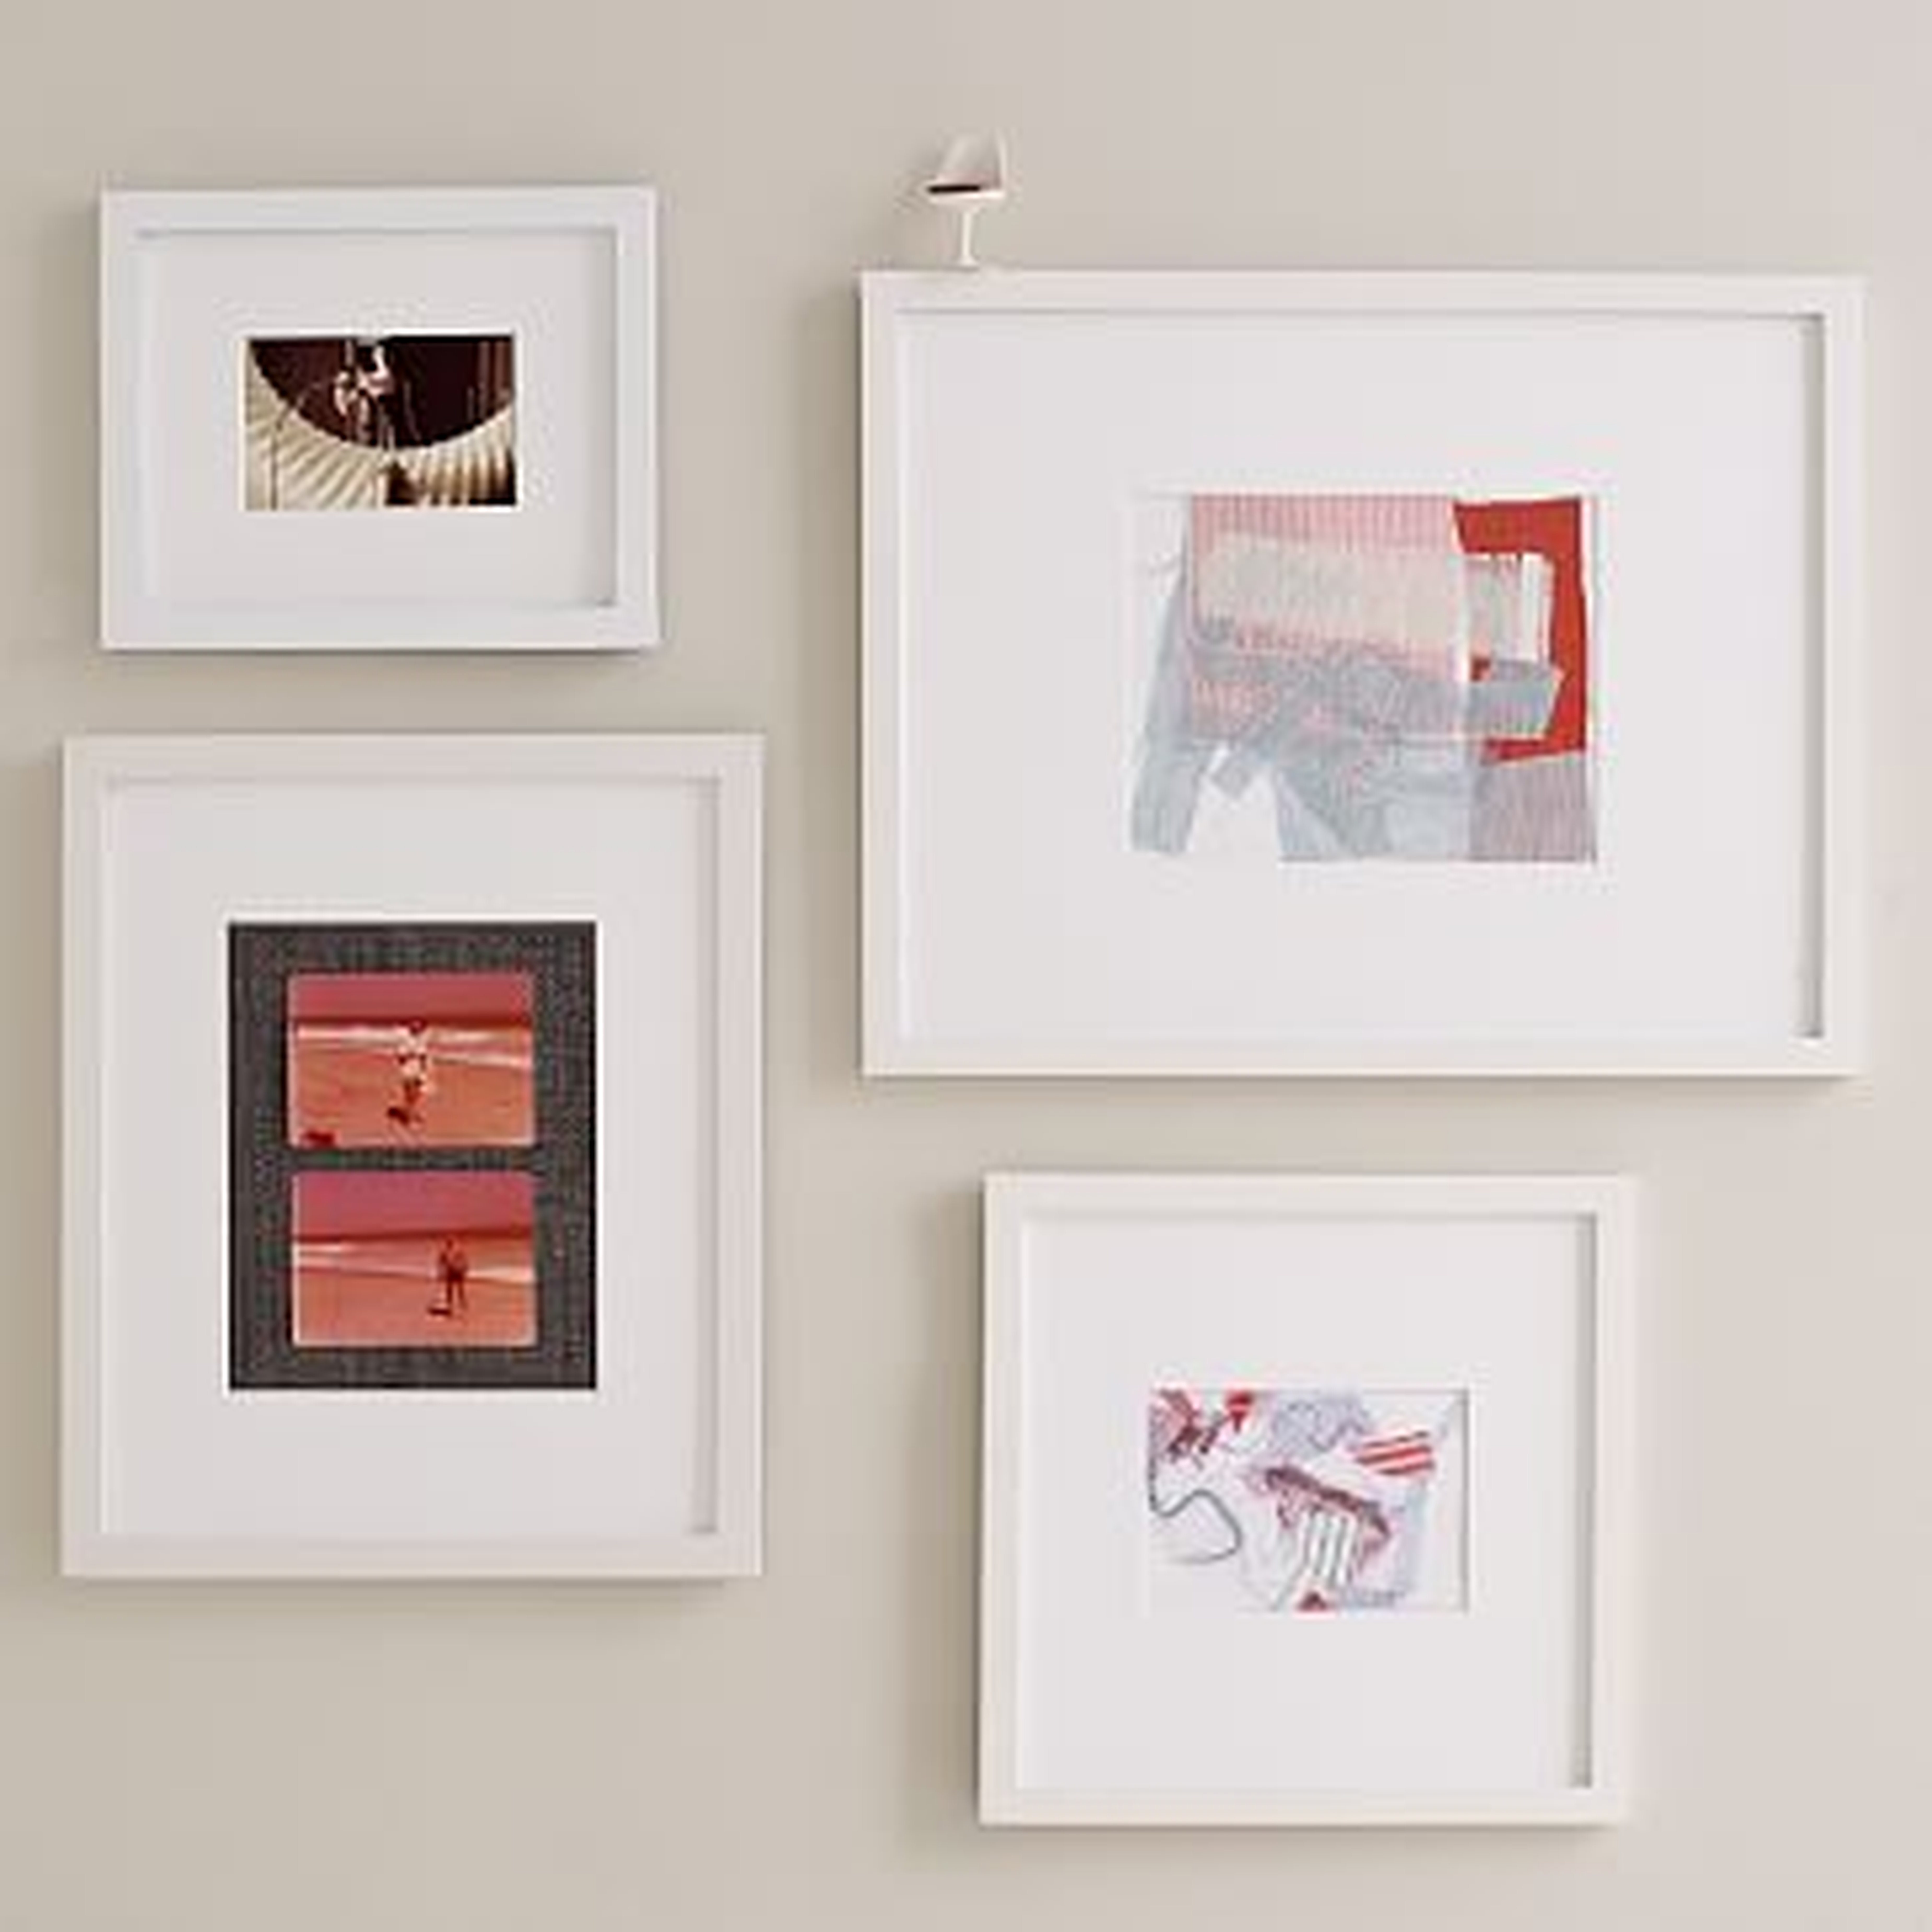 Gallery Frames, Set Of 4, Assorted Sizes, White Lacquer - West Elm